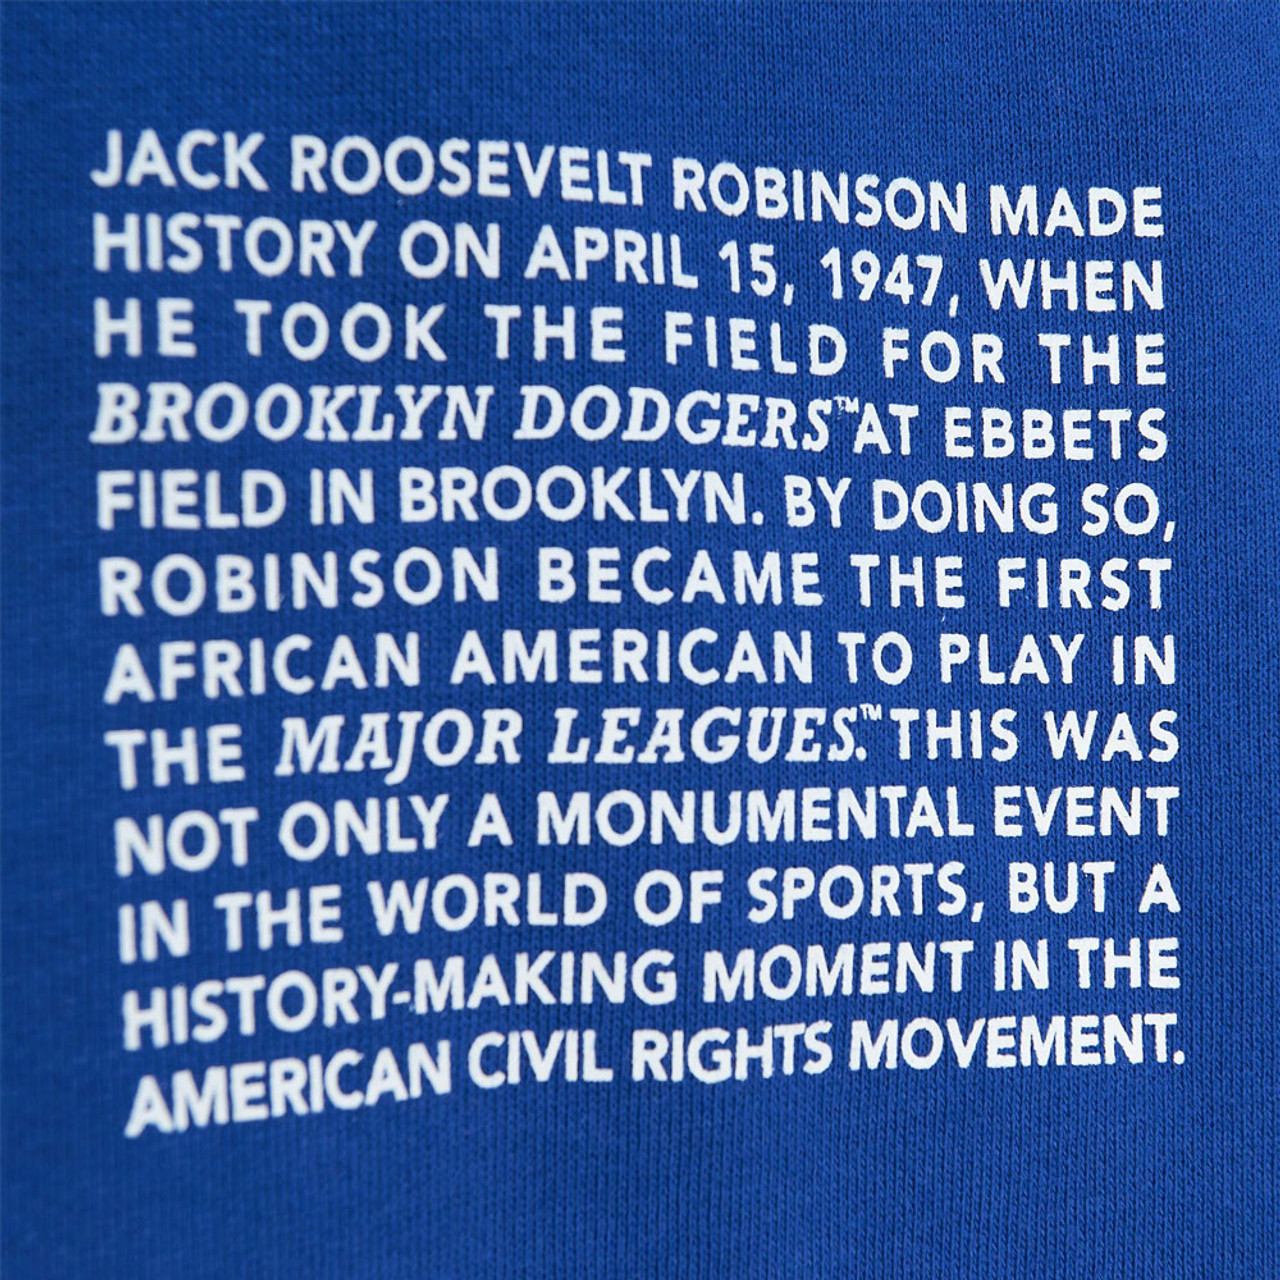 Jackie Robinson Brooklyn Dodgers Sublimated Player Tee